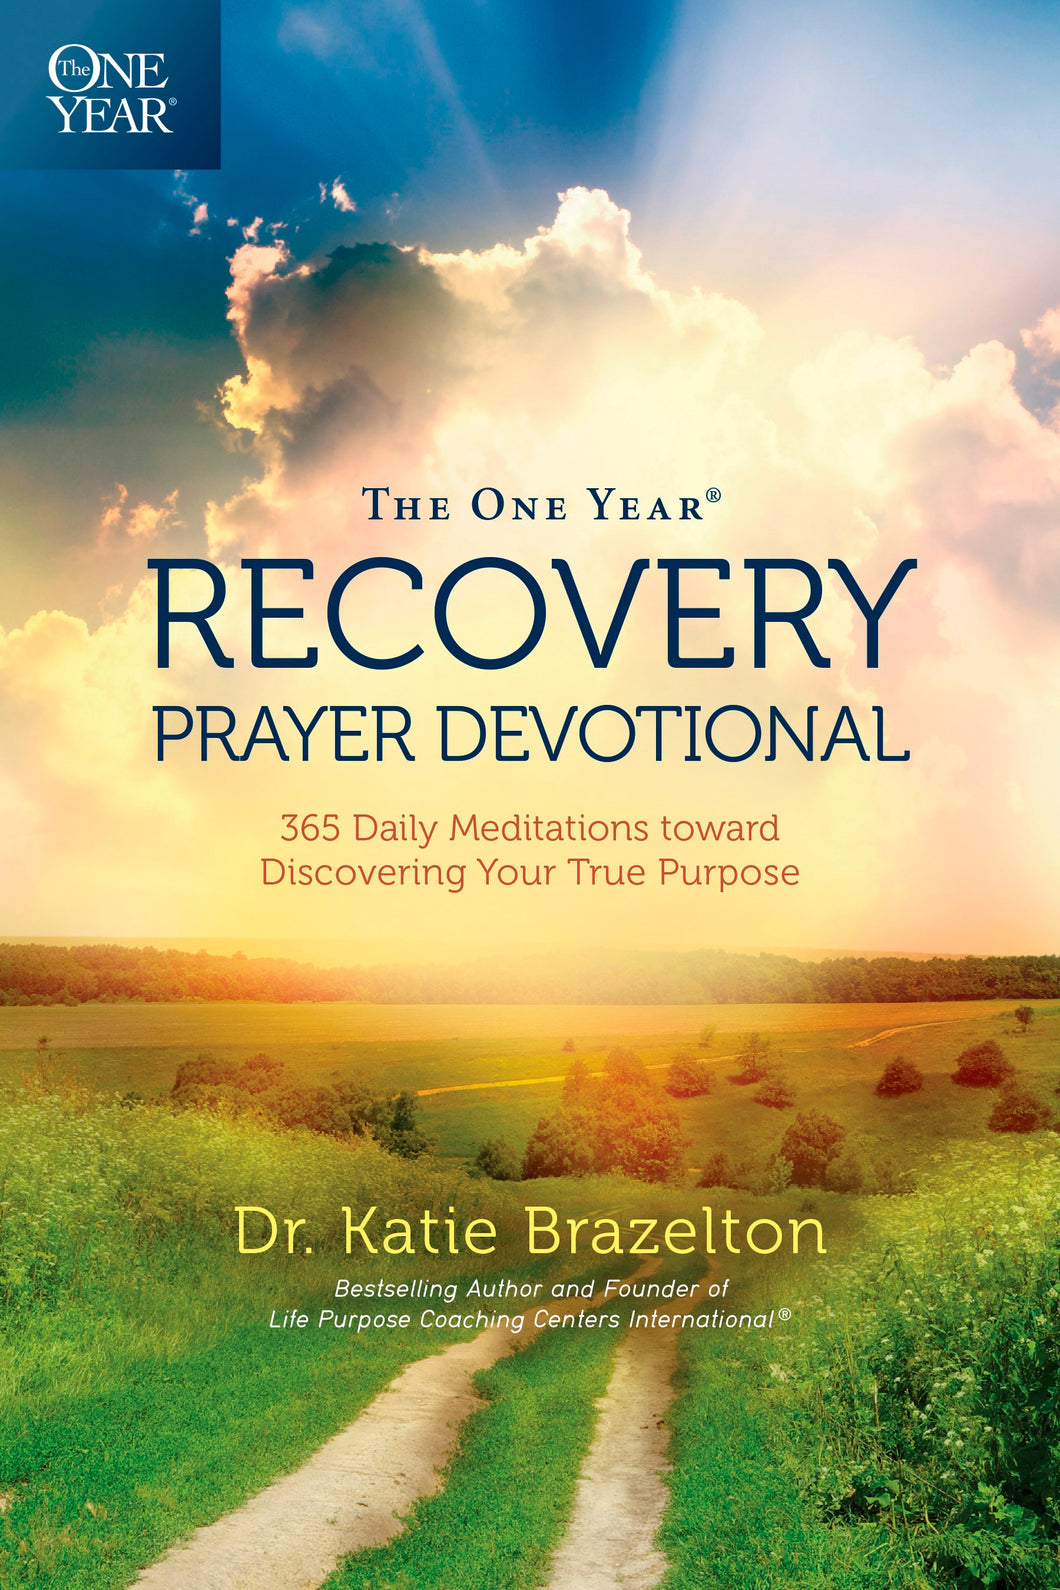 The One Year Recovery Prayer Devotional